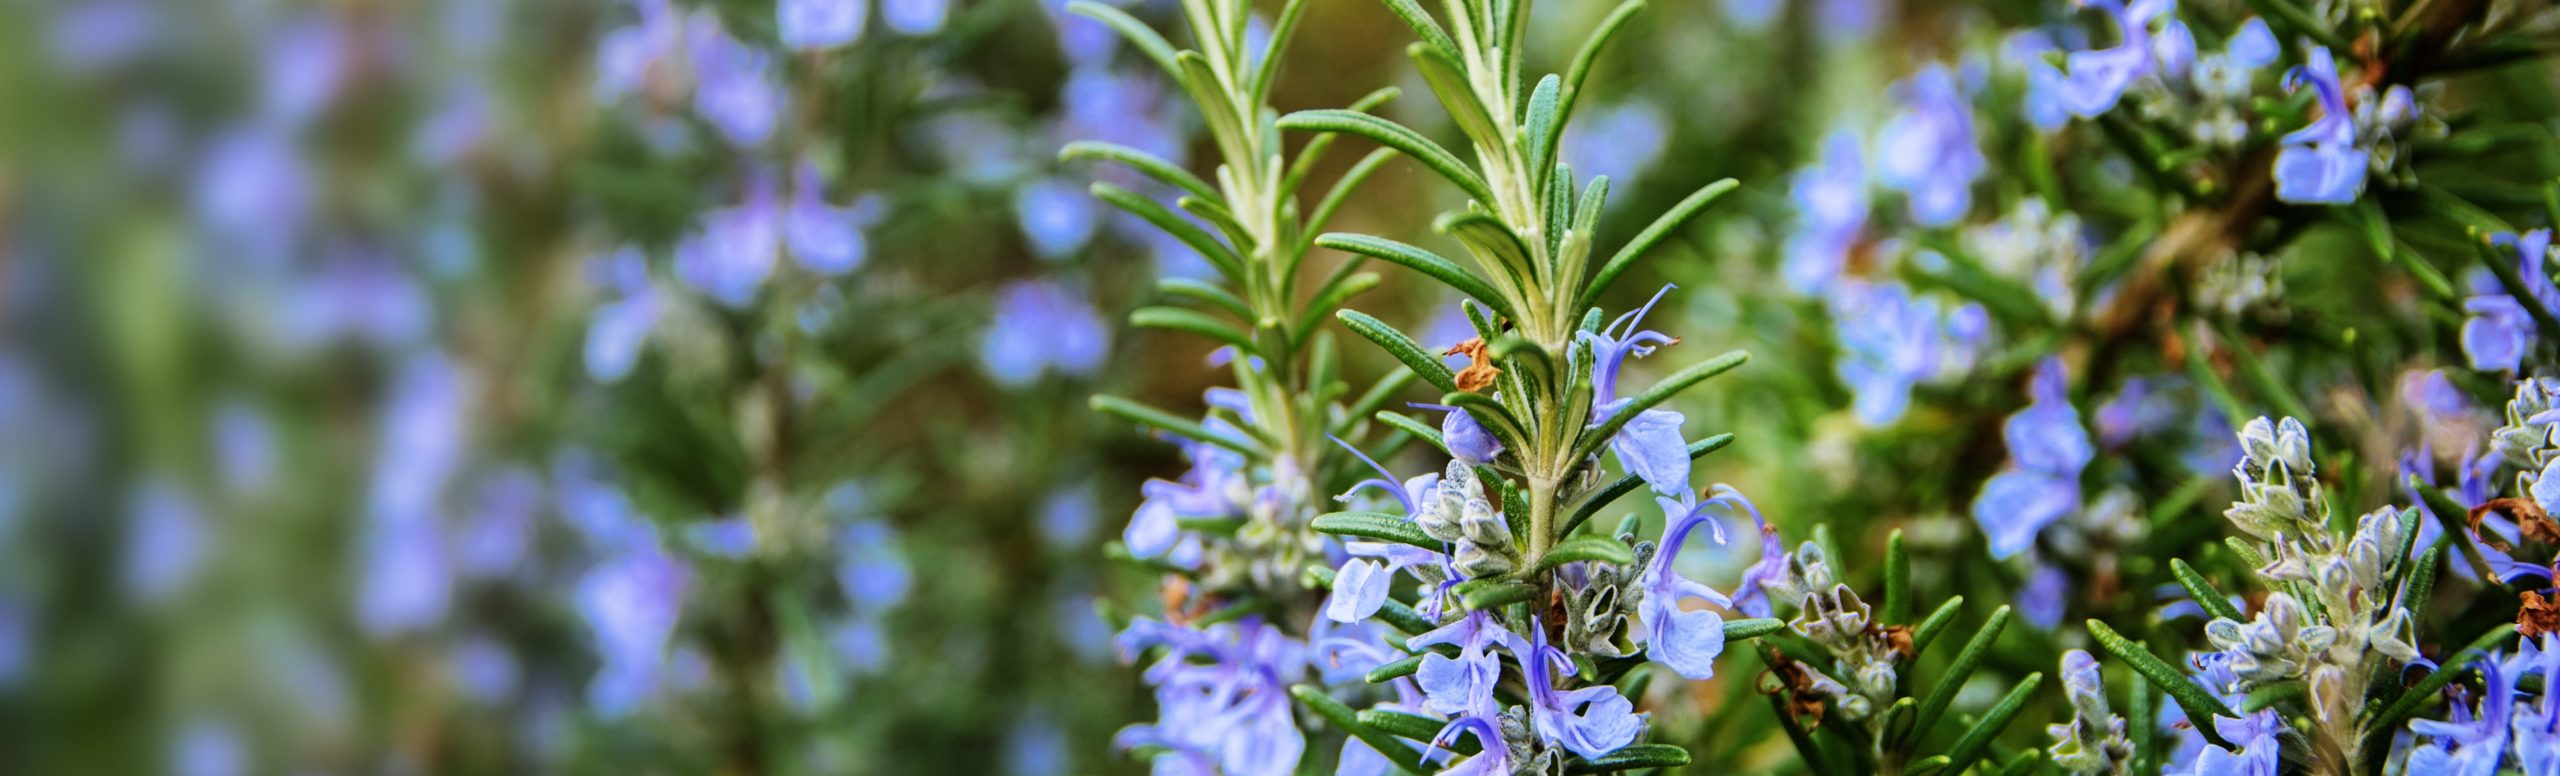 Rosemary: This Supportive Superstar is a Hall of Fame Aromatic